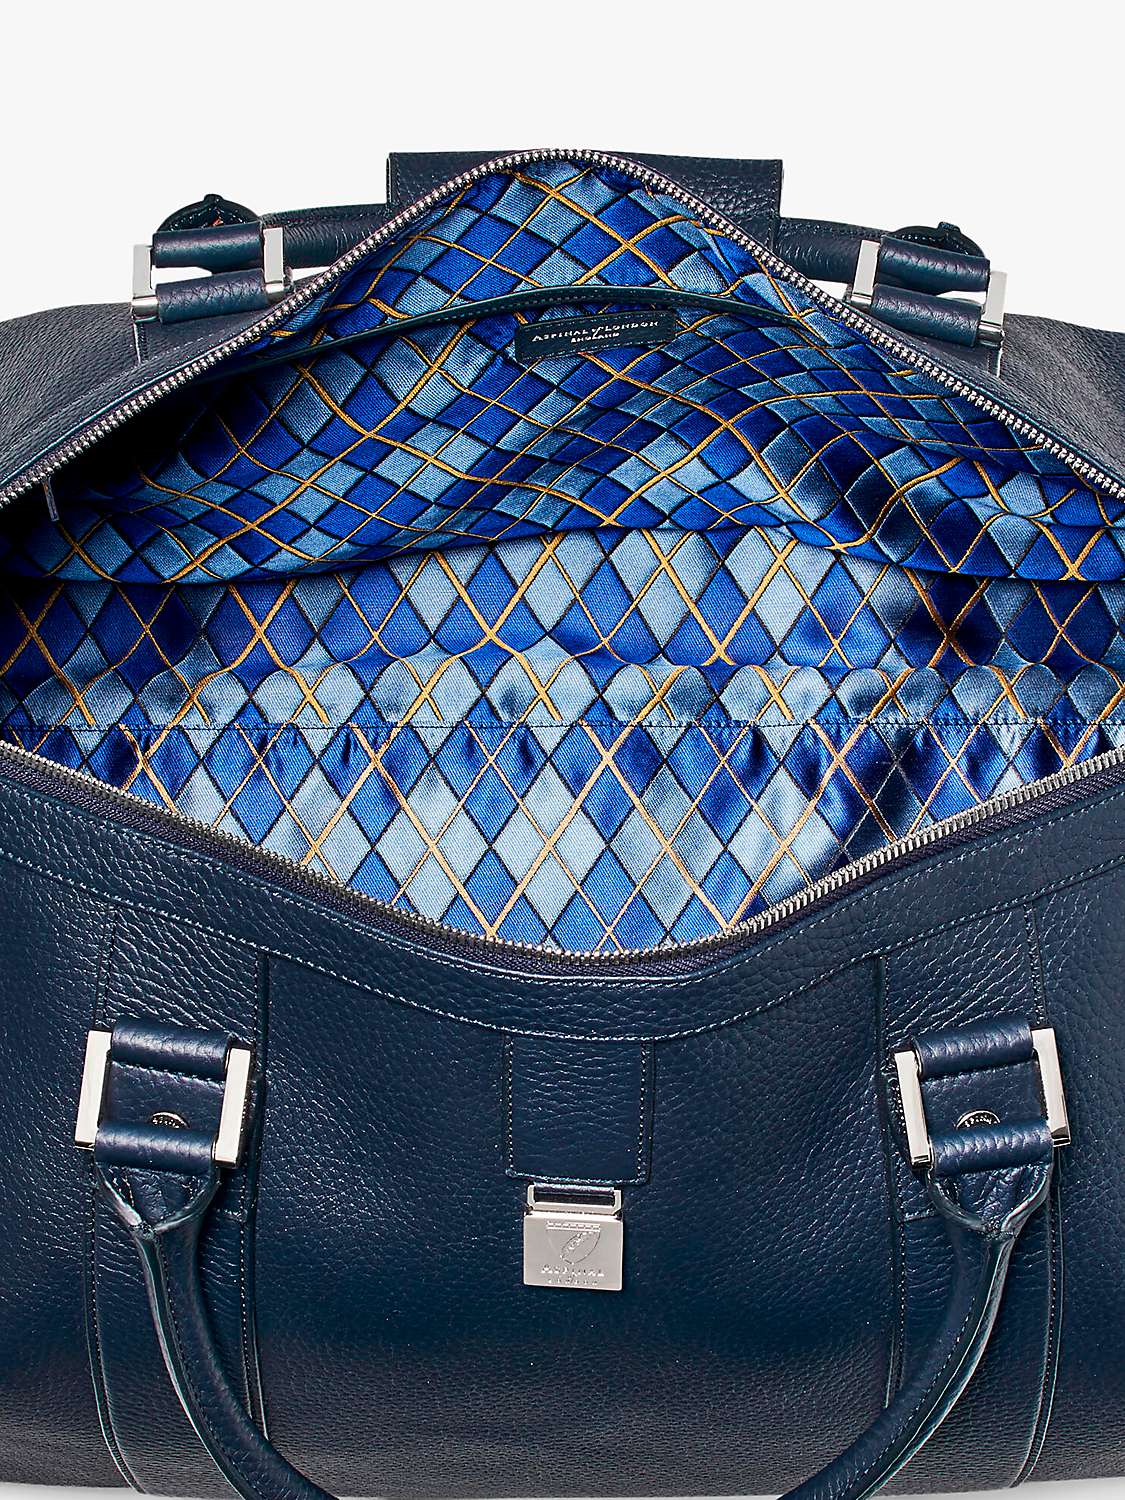 Buy Aspinal of London Boston Pebble Grain Leather Holdall Bag Online at johnlewis.com